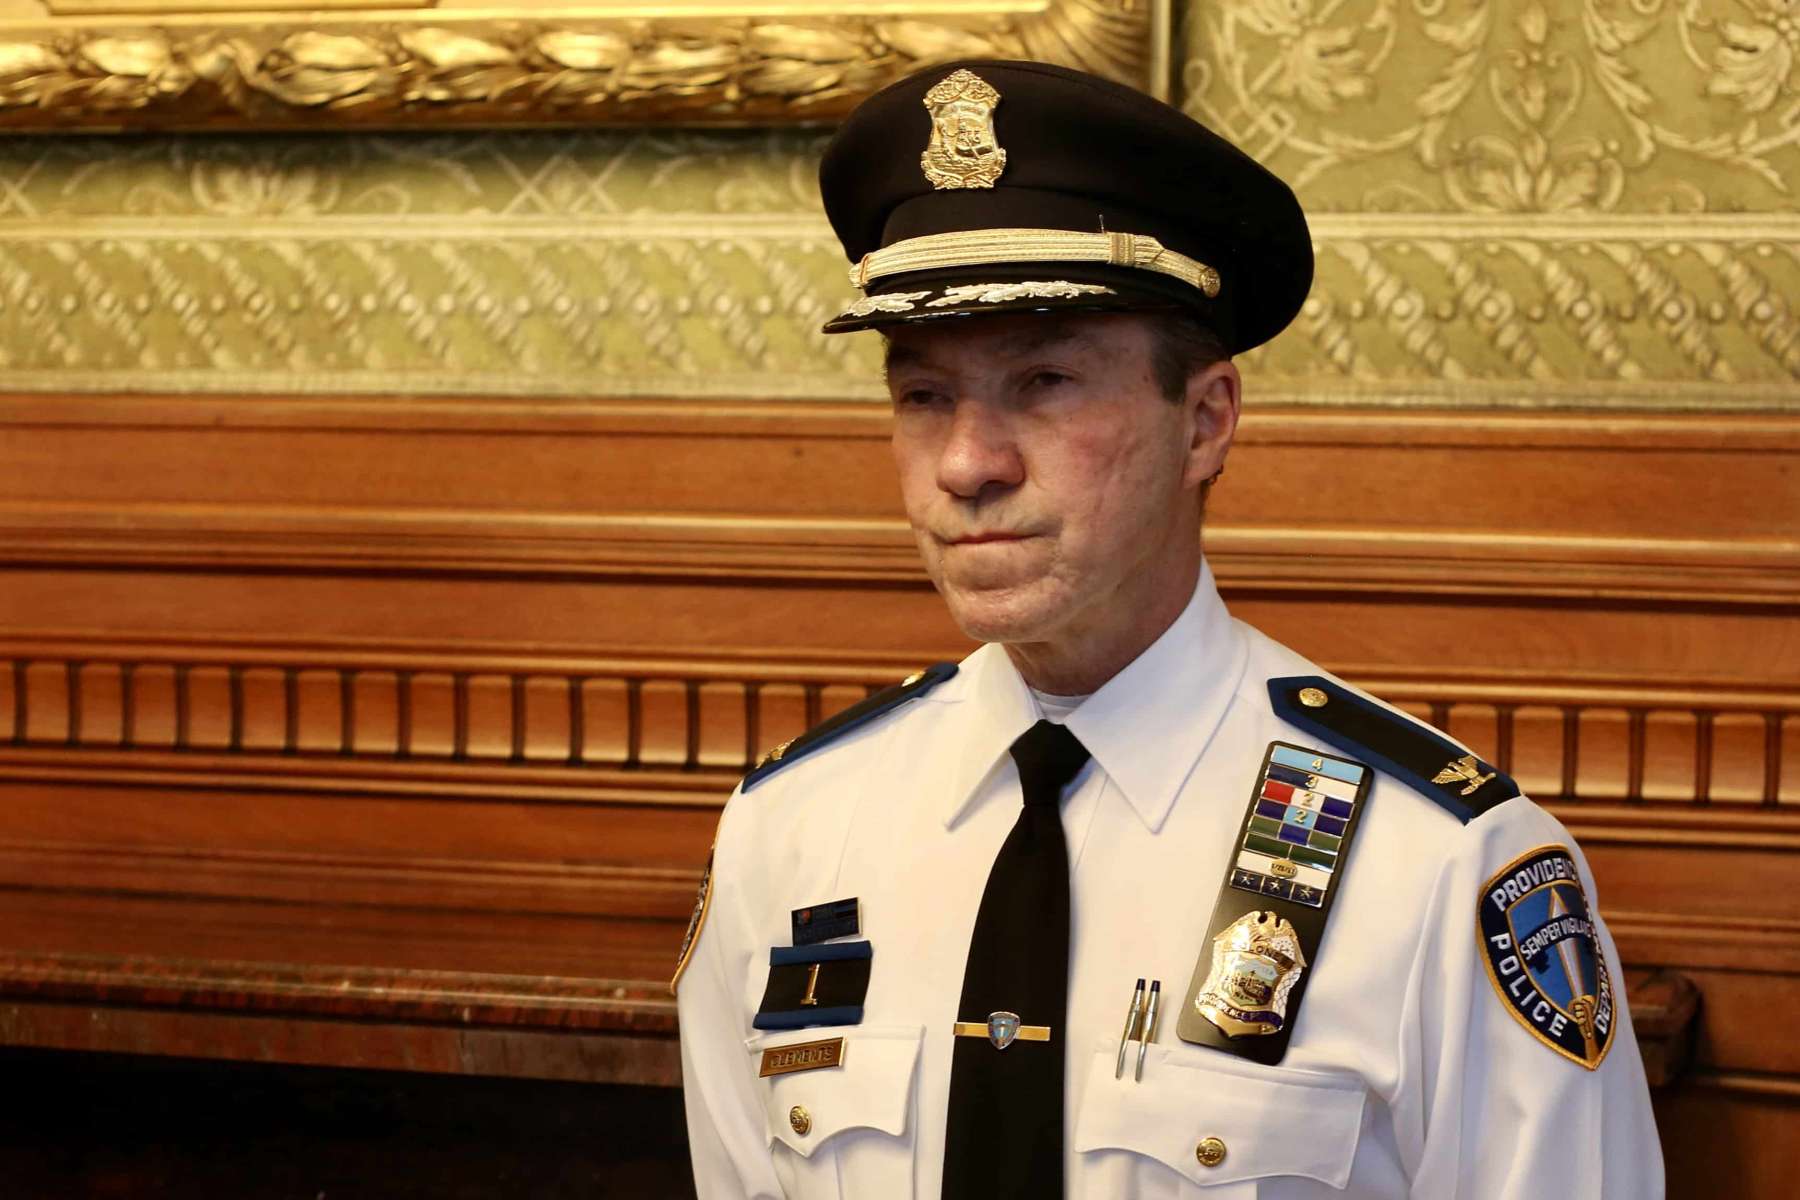 Rhode Island News: The search for the next Providence Police Chief begins